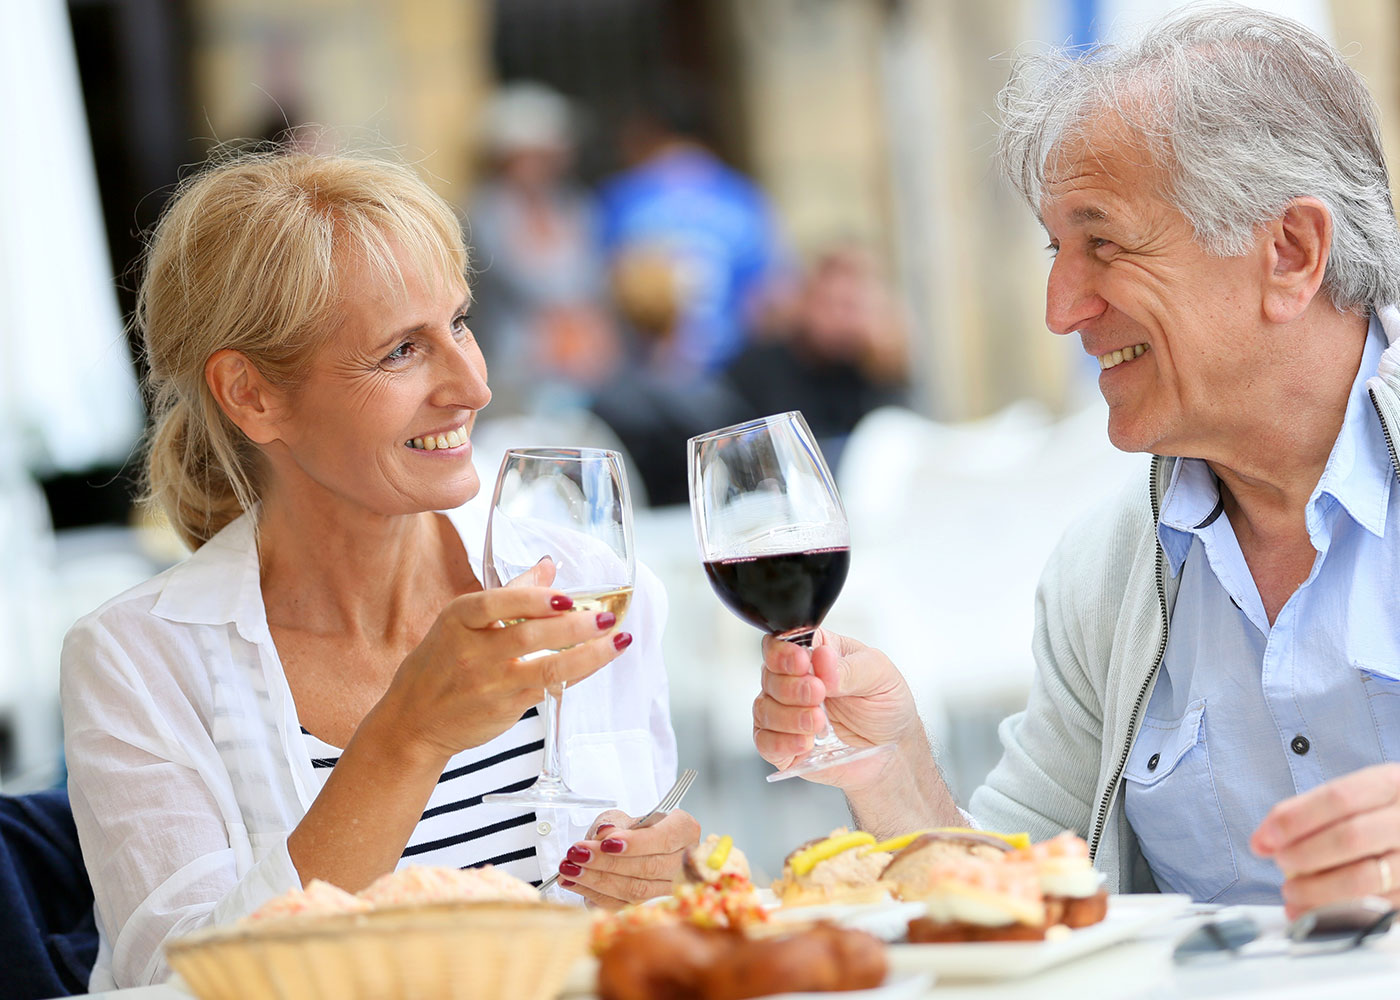 Older man and woman clinking wine glasses, eating, smiling at each other-Dining at HarborChase